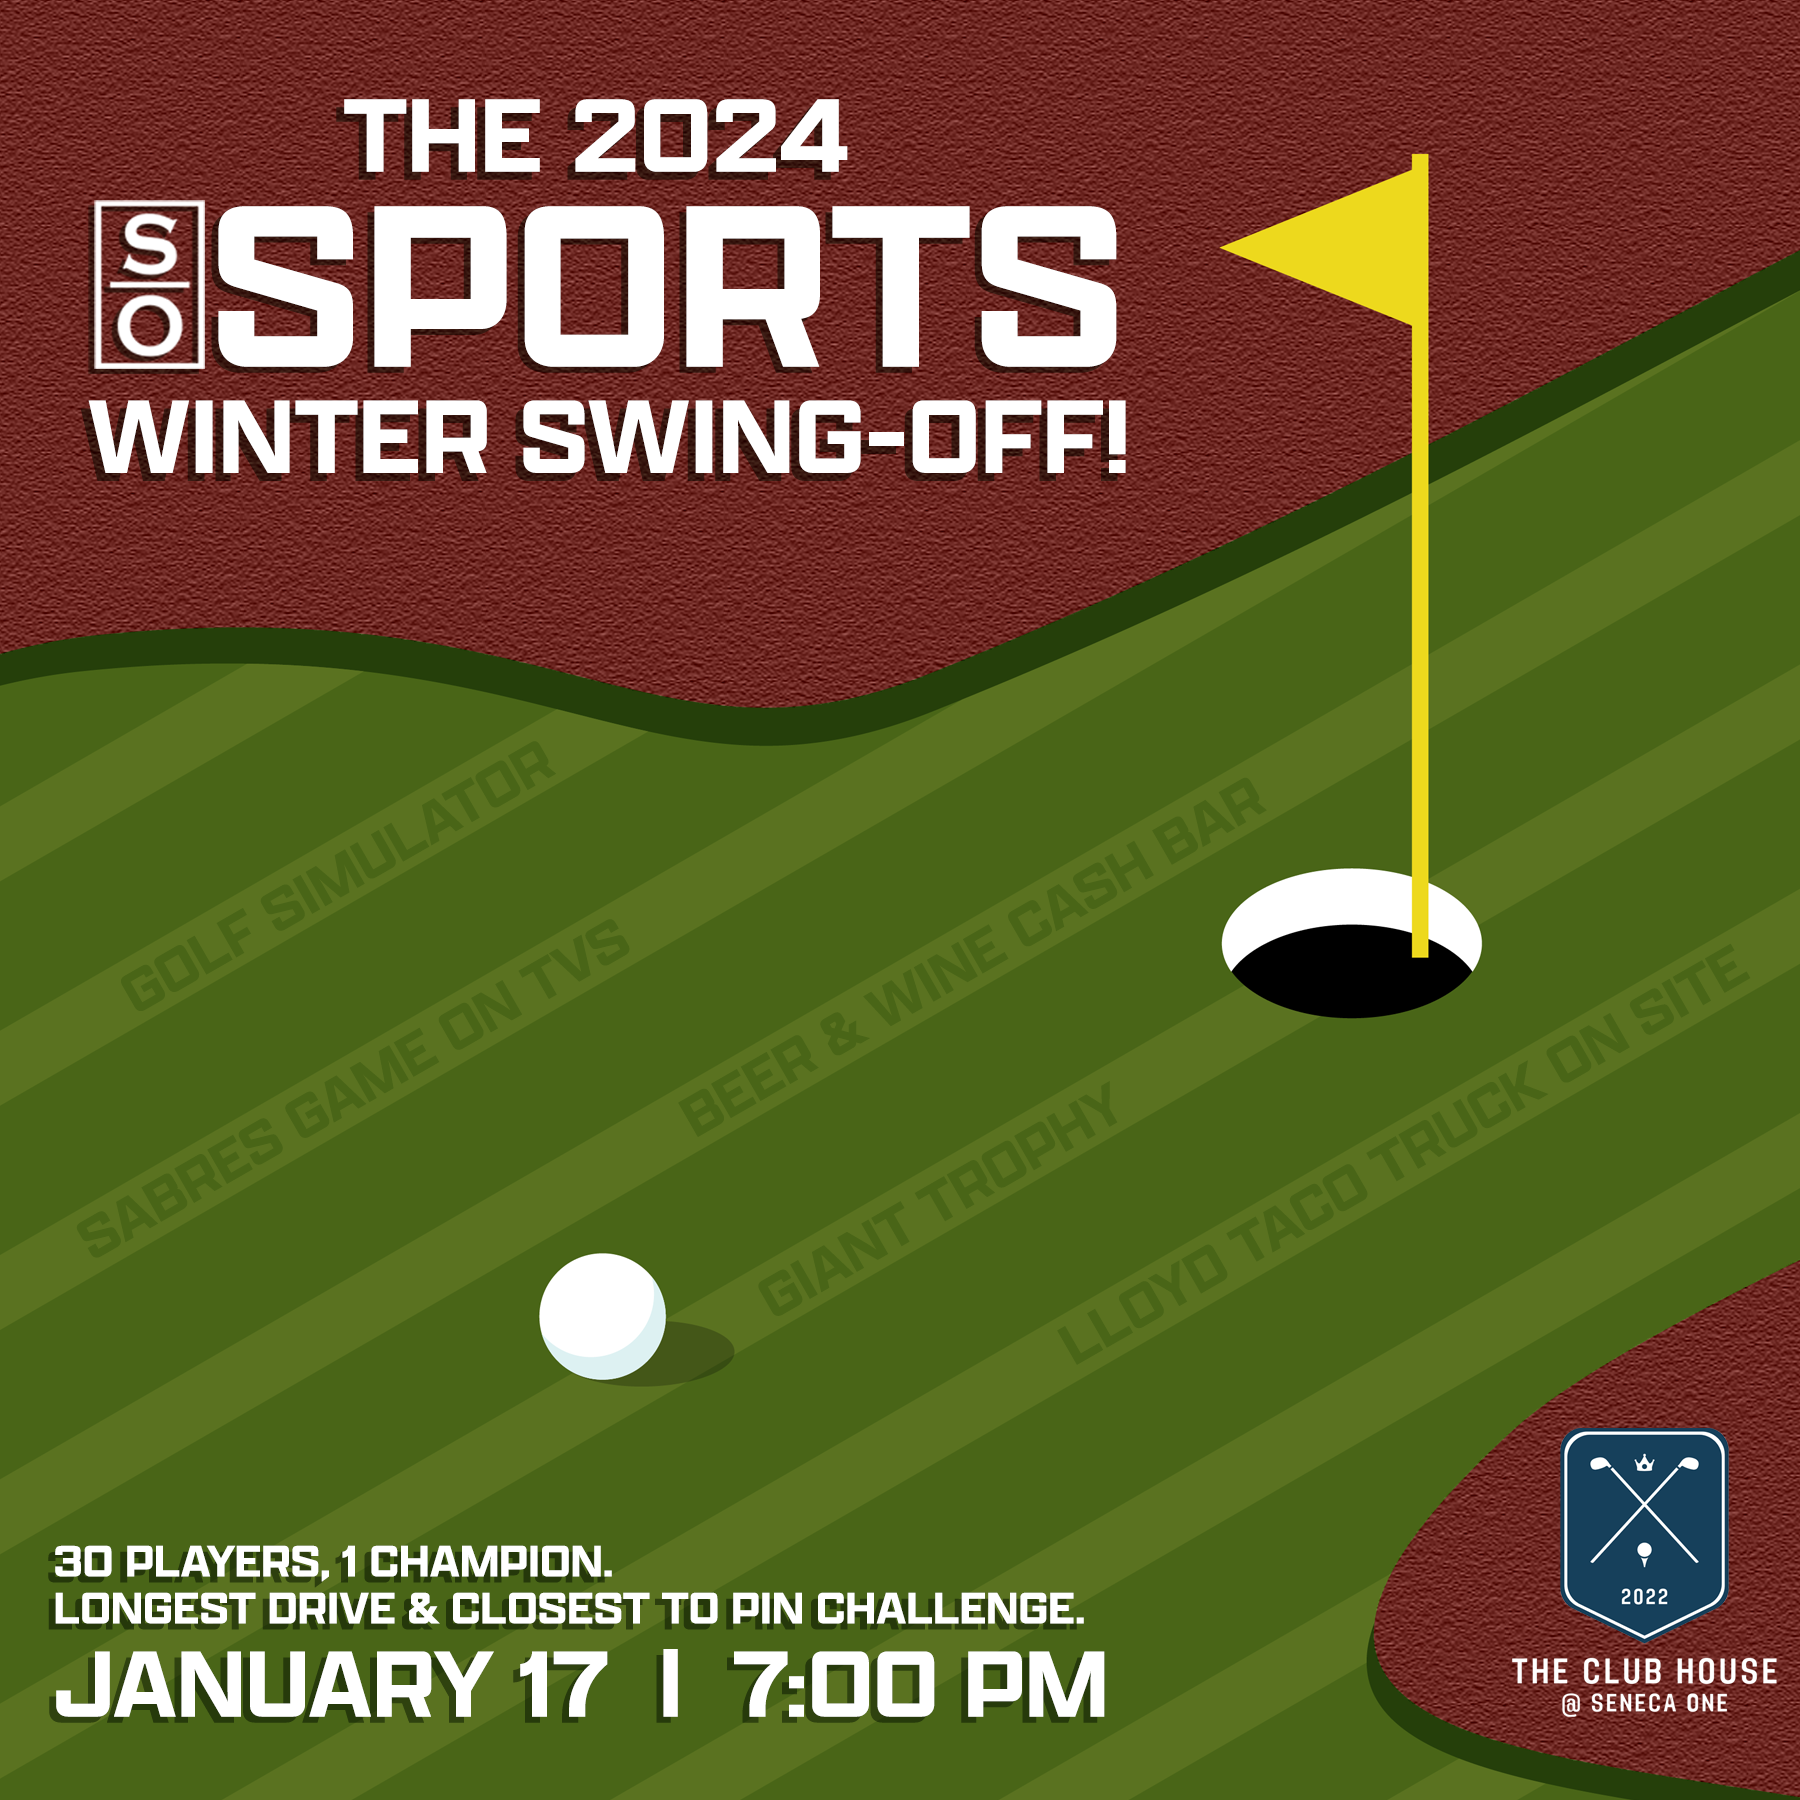 S/O Sports presents: THE INAUGURAL WINTER SWING-OFF!